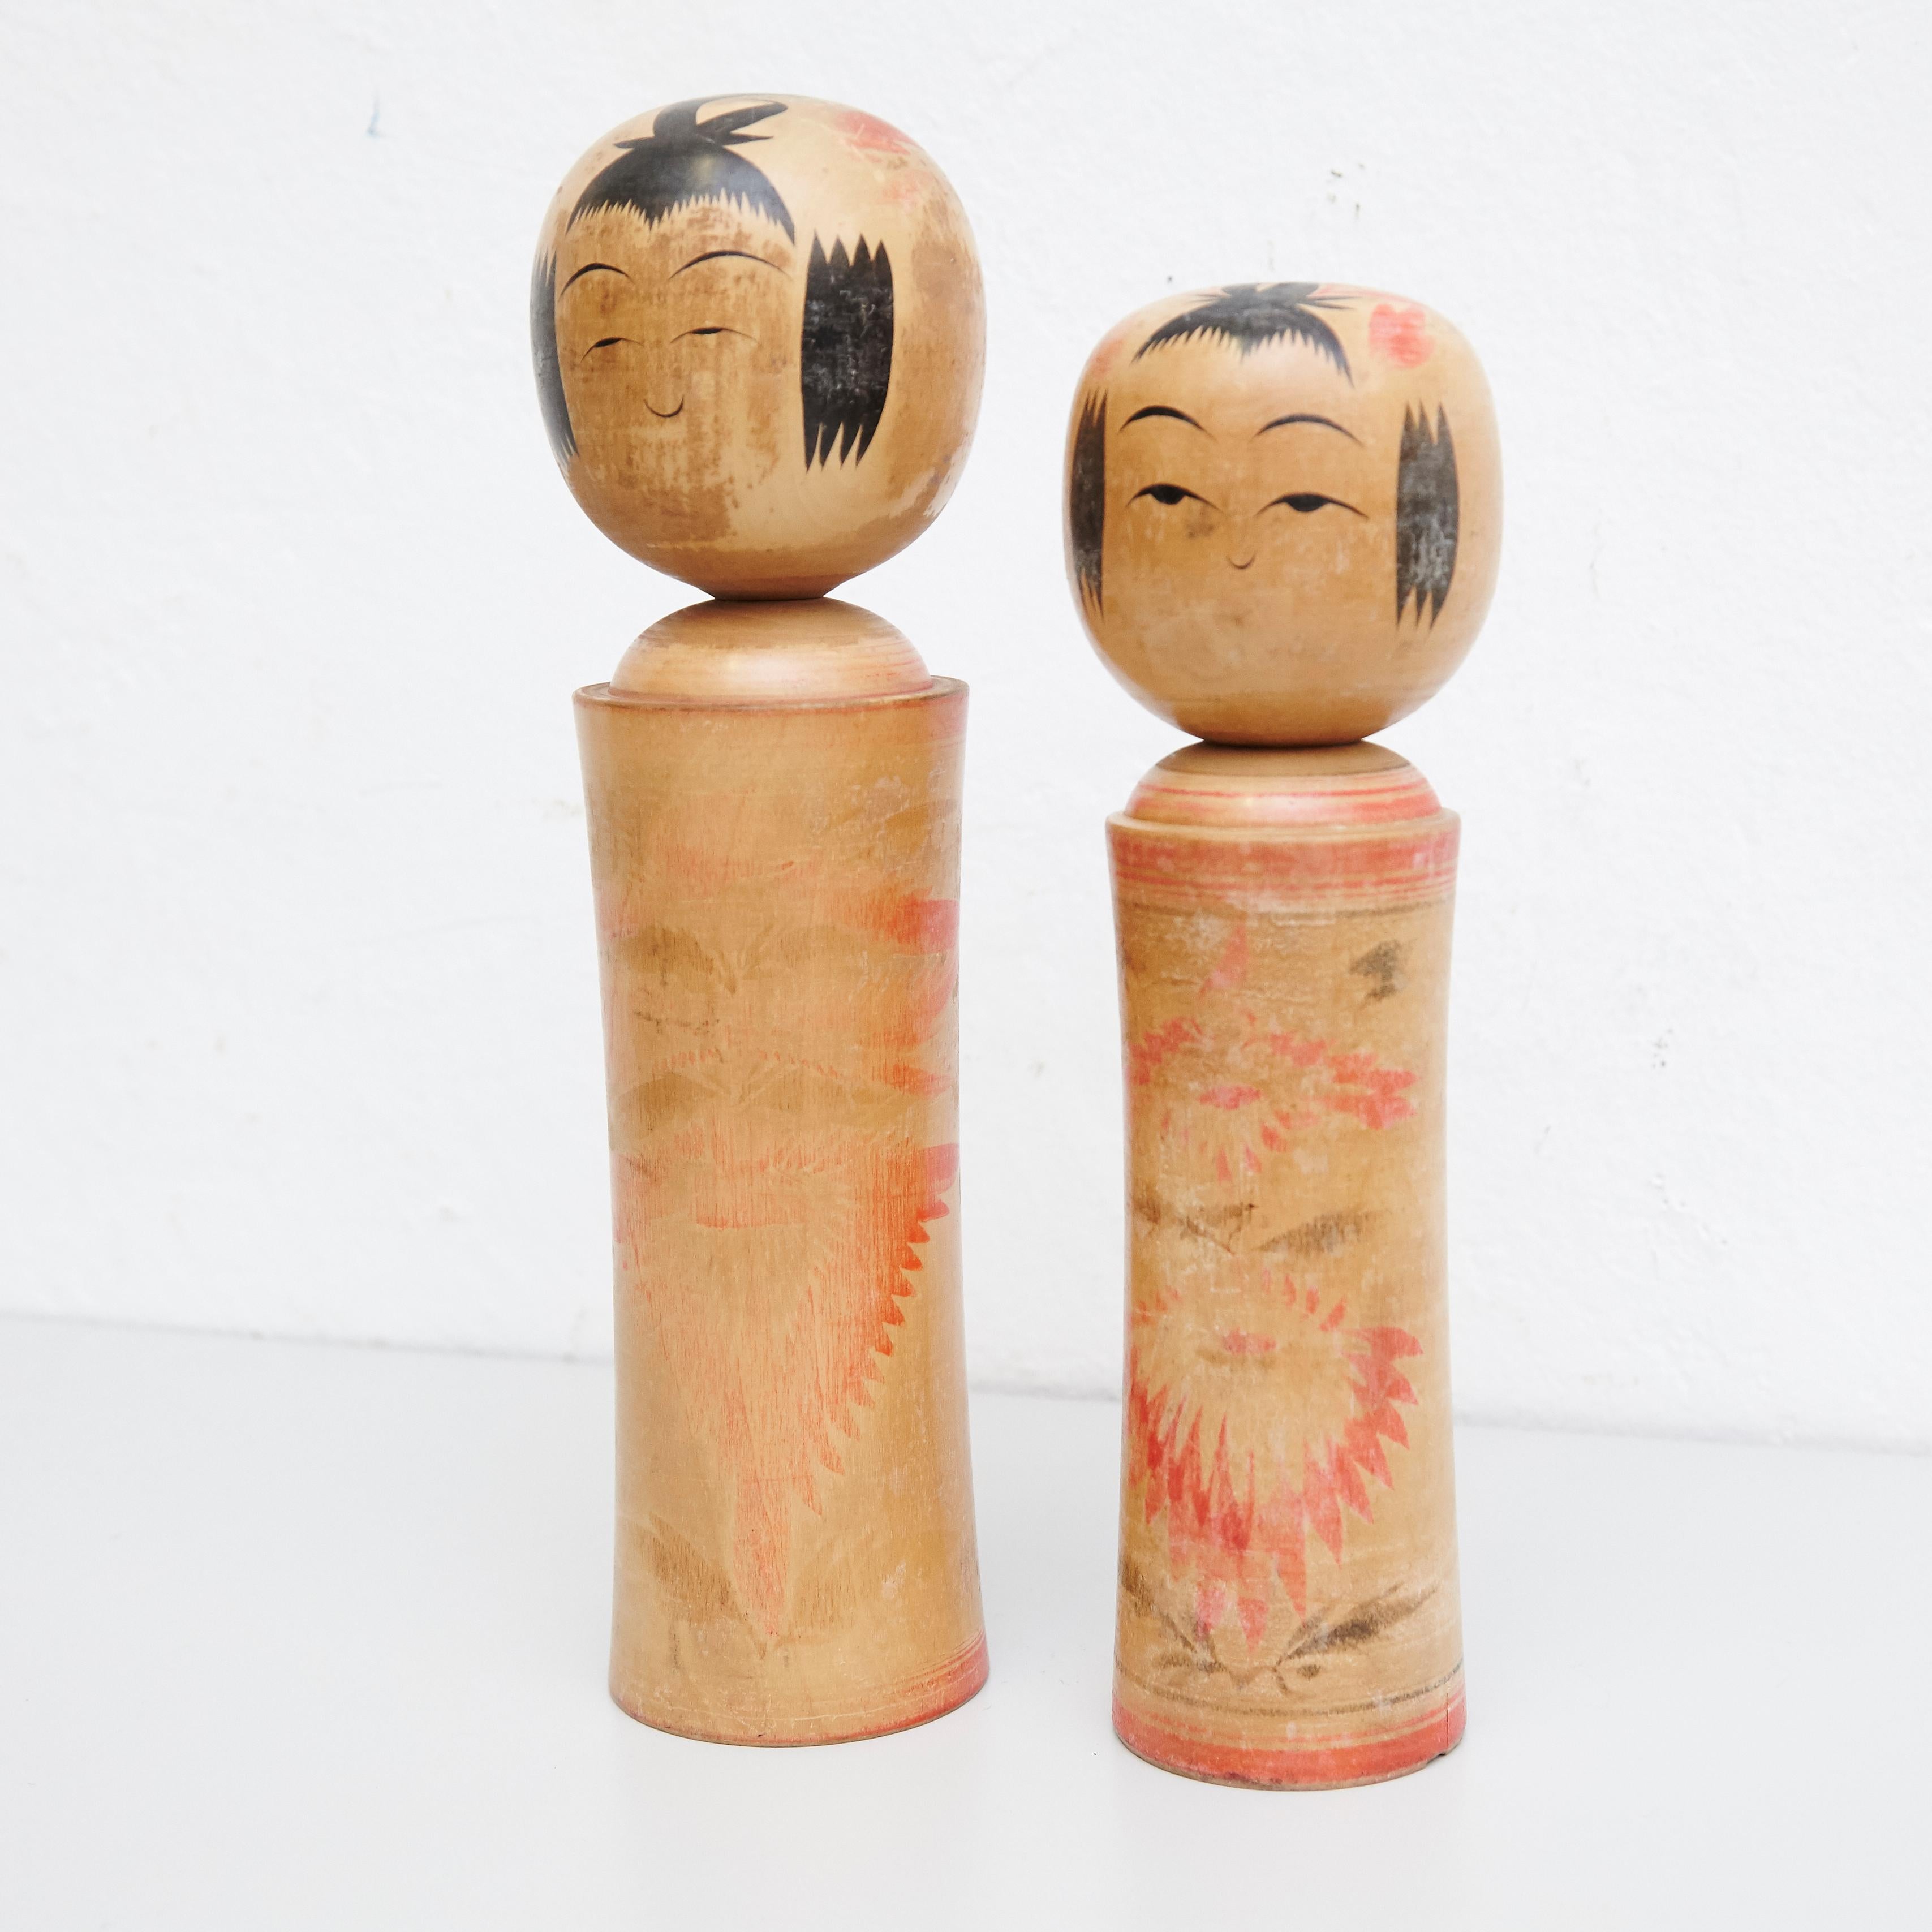 Japanese dolls called Kokeshi of the early 20th century.
Provenance from the northern Japan.
Set of 2.

Measures: 

31 x 8 cm
28 x 7 cm


Handmade by Japanese artisants from wood. Have a simple trunk as a body and an enlarged head. One